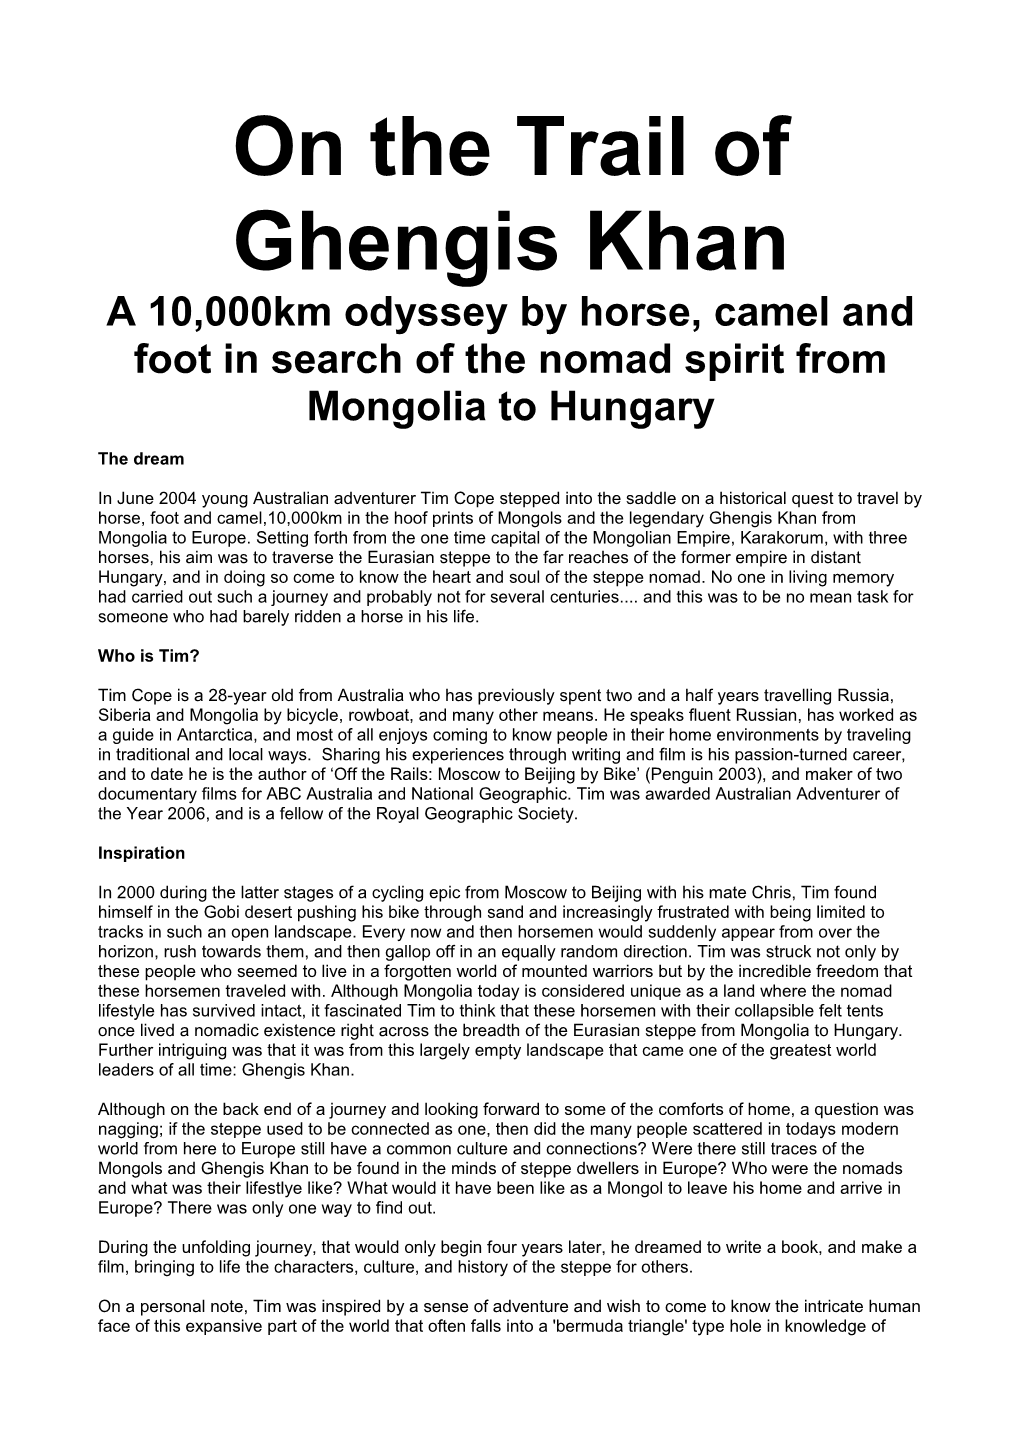 On the Trail of Ghengis Khan